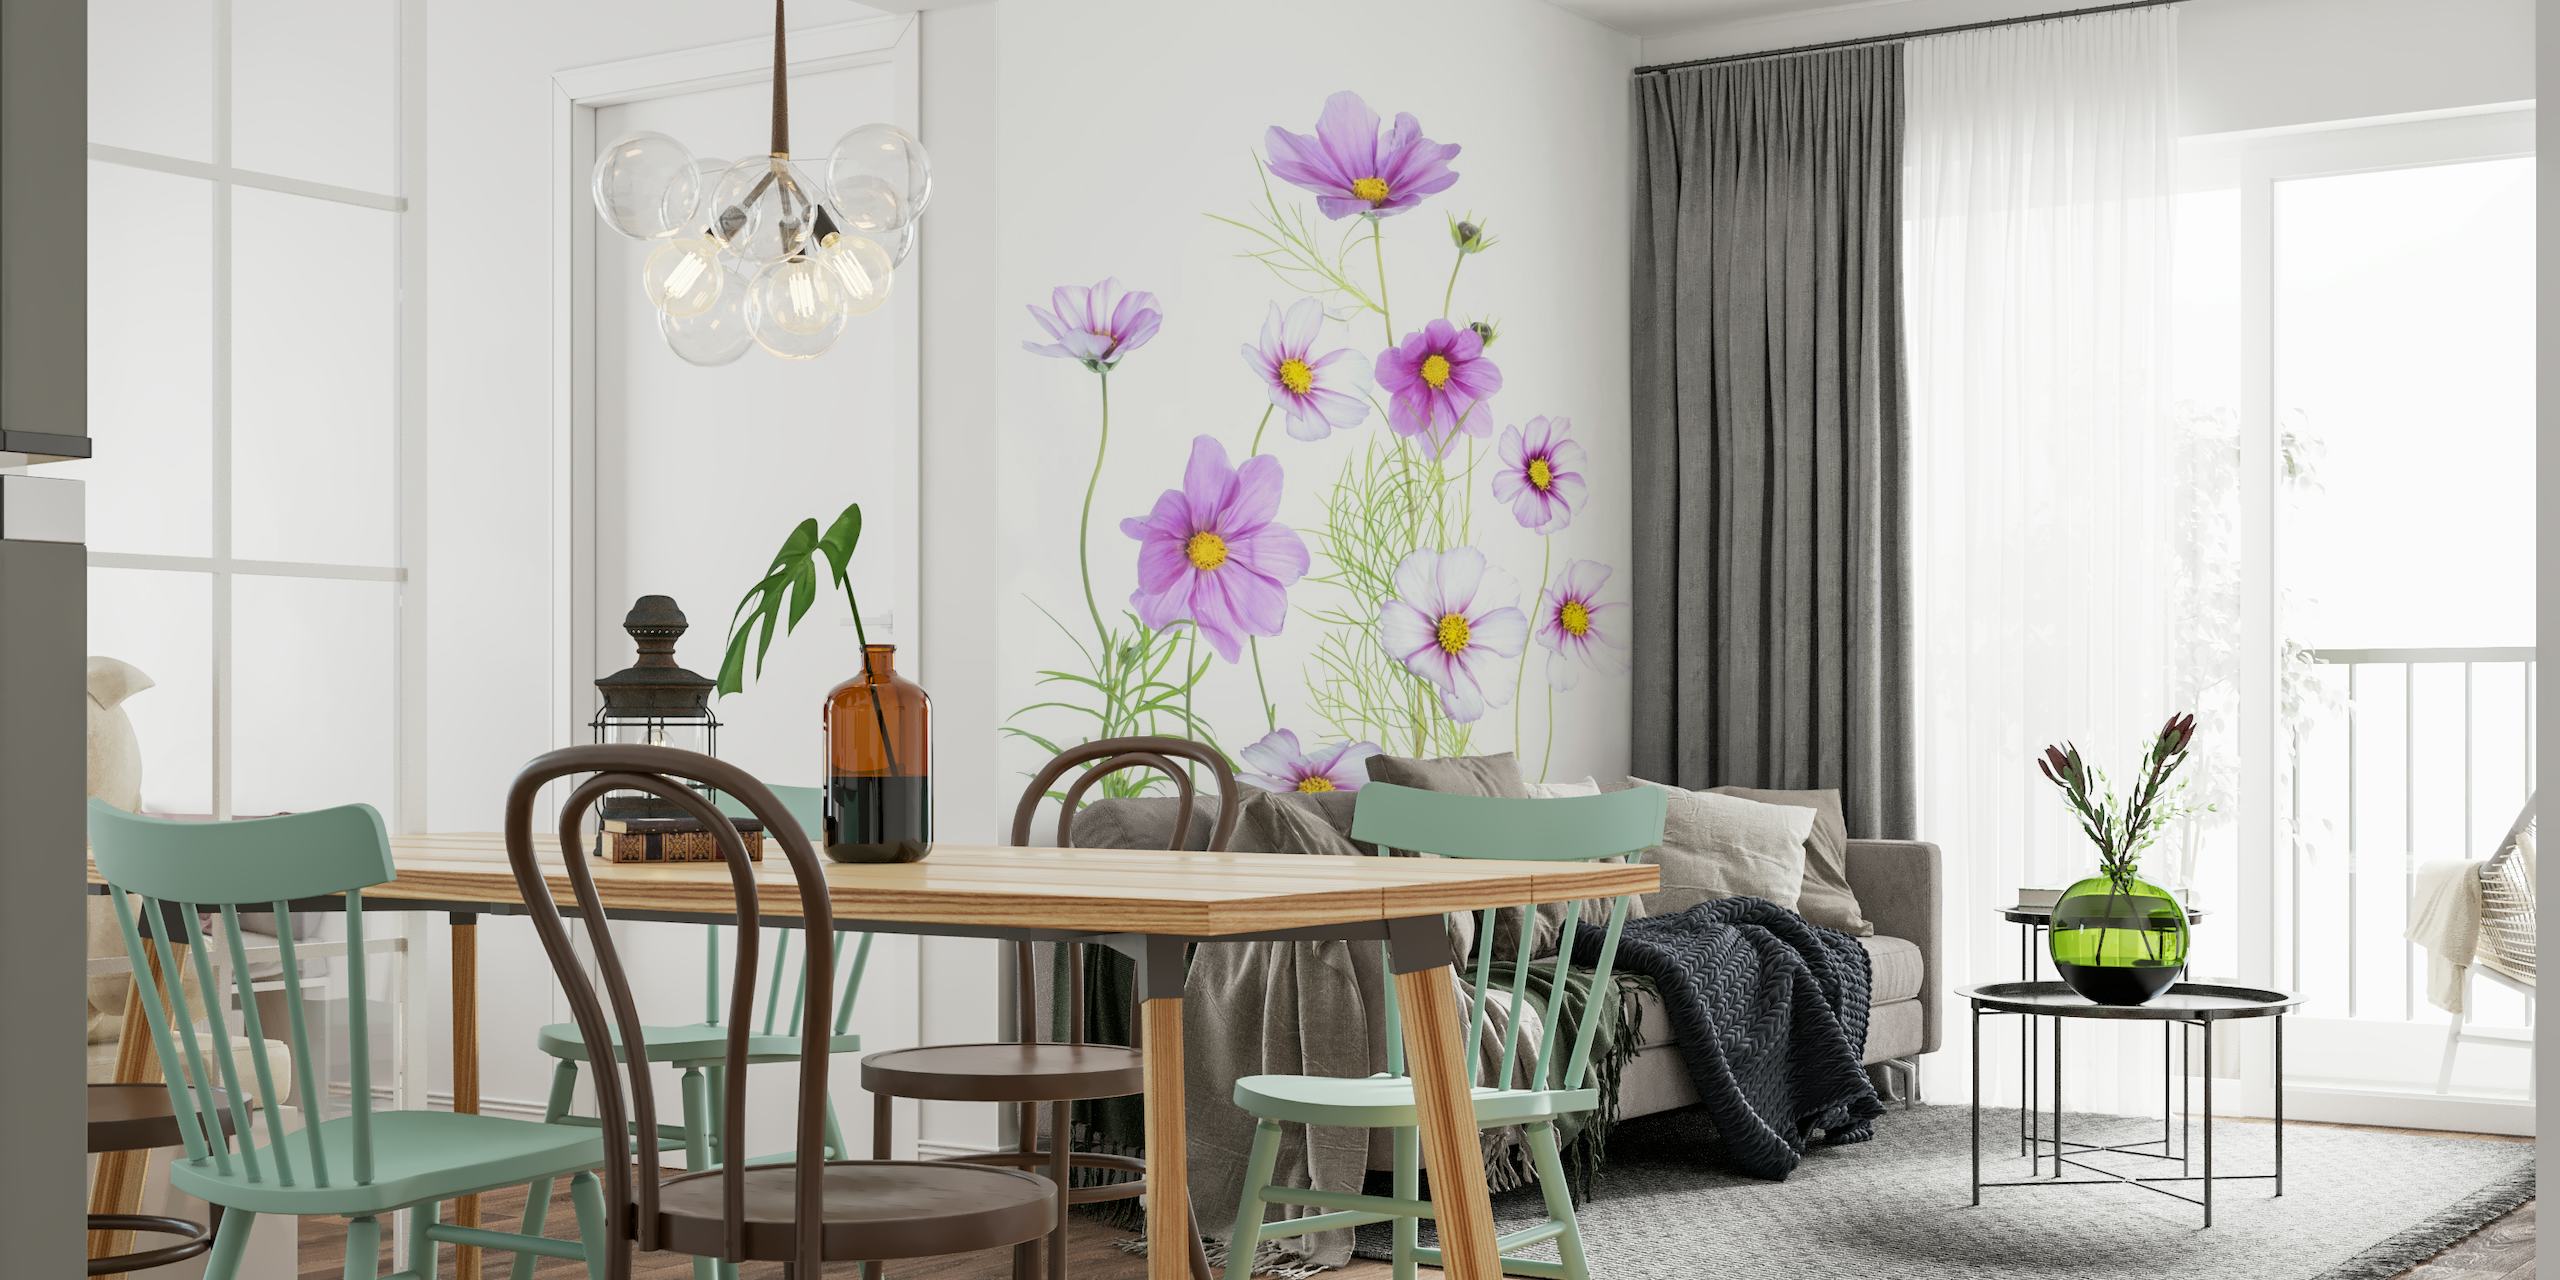 Cosmos flowers wall mural in violet and white